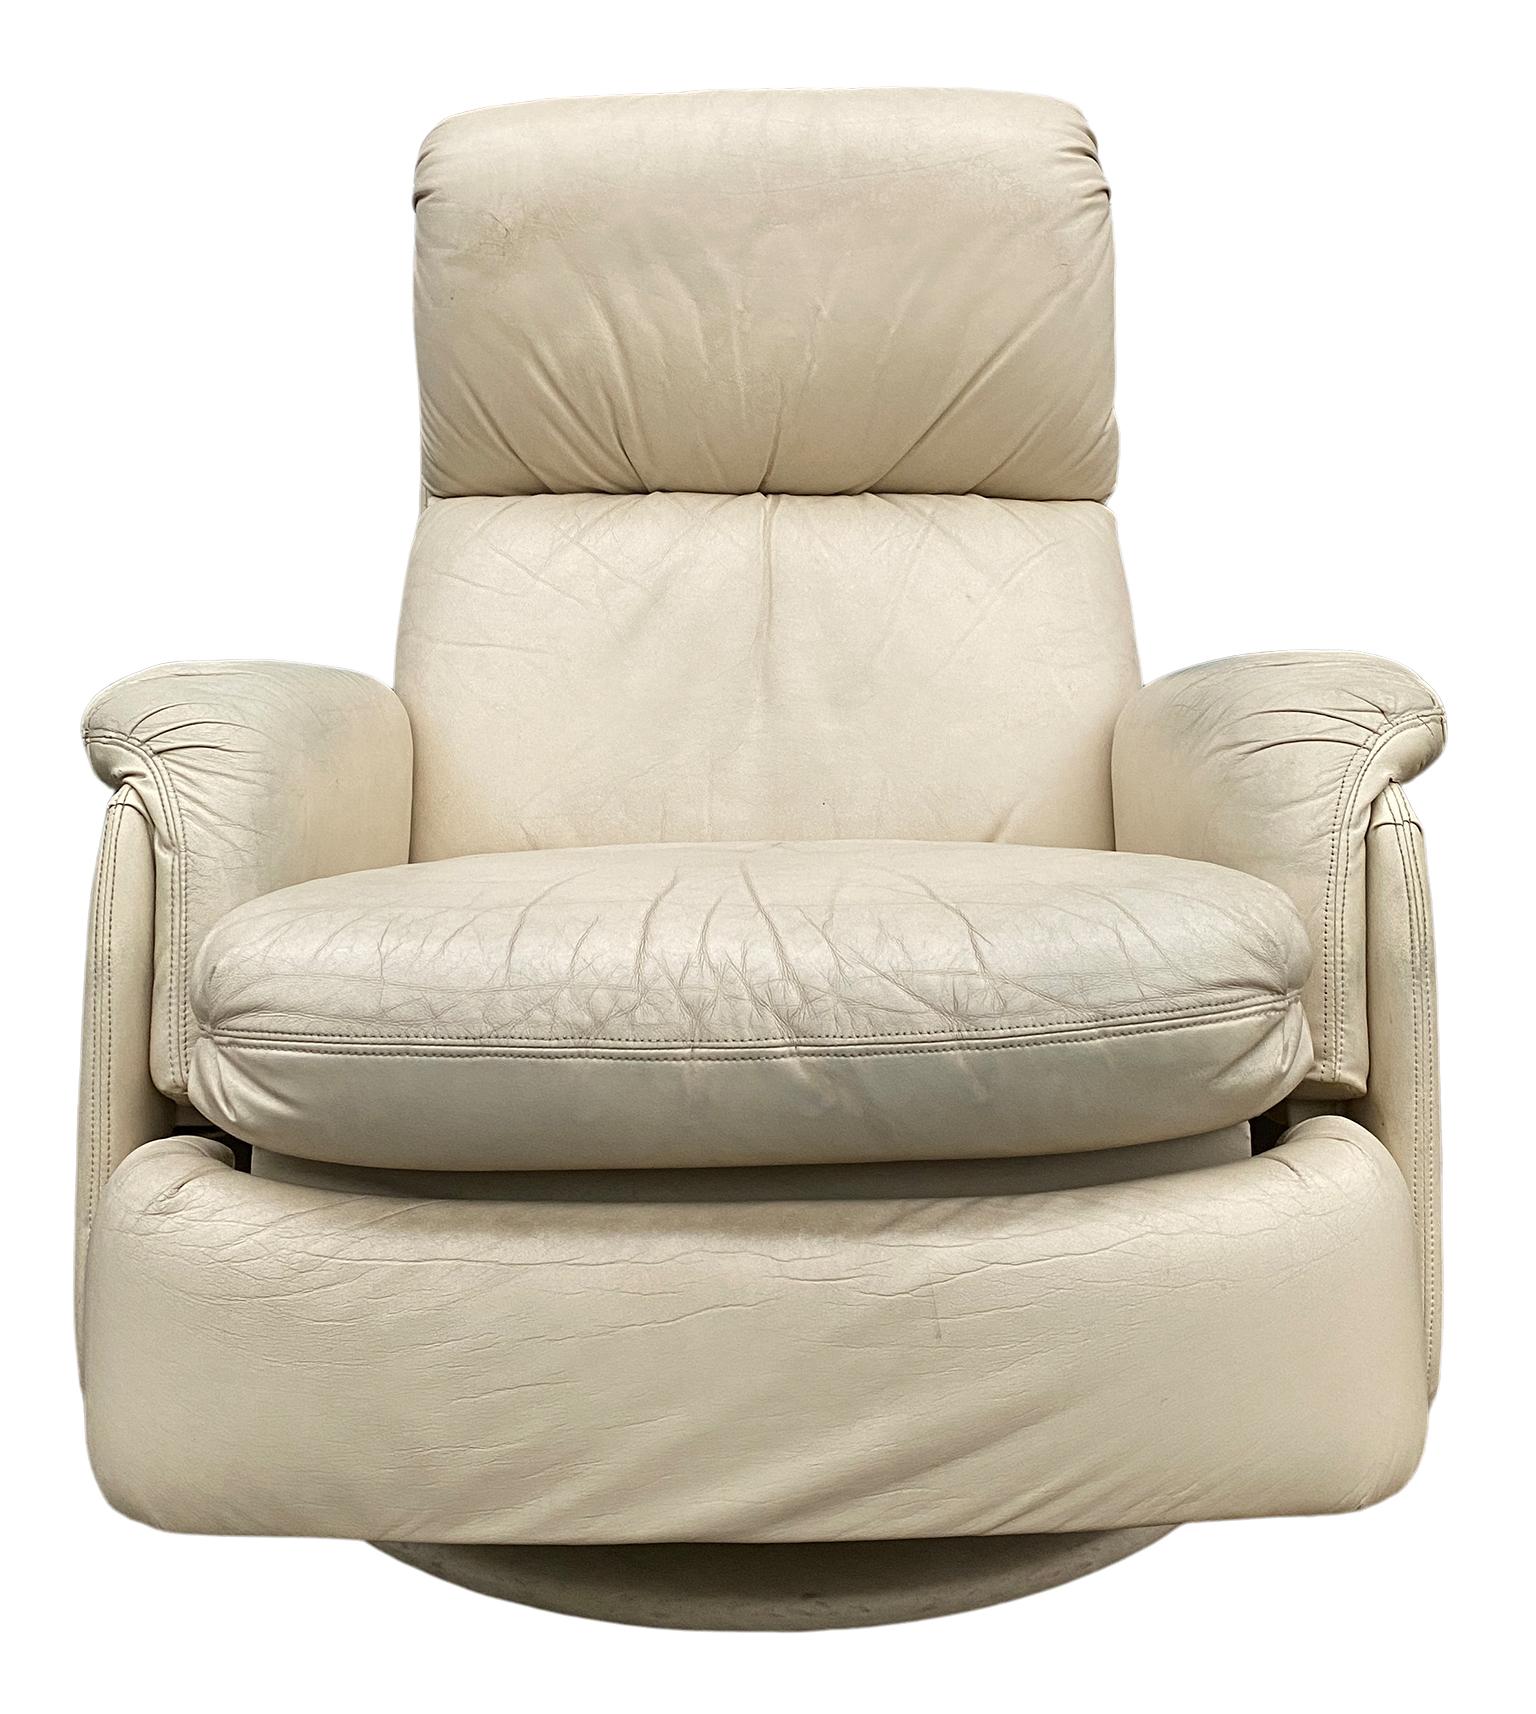 tan leather recliner chair